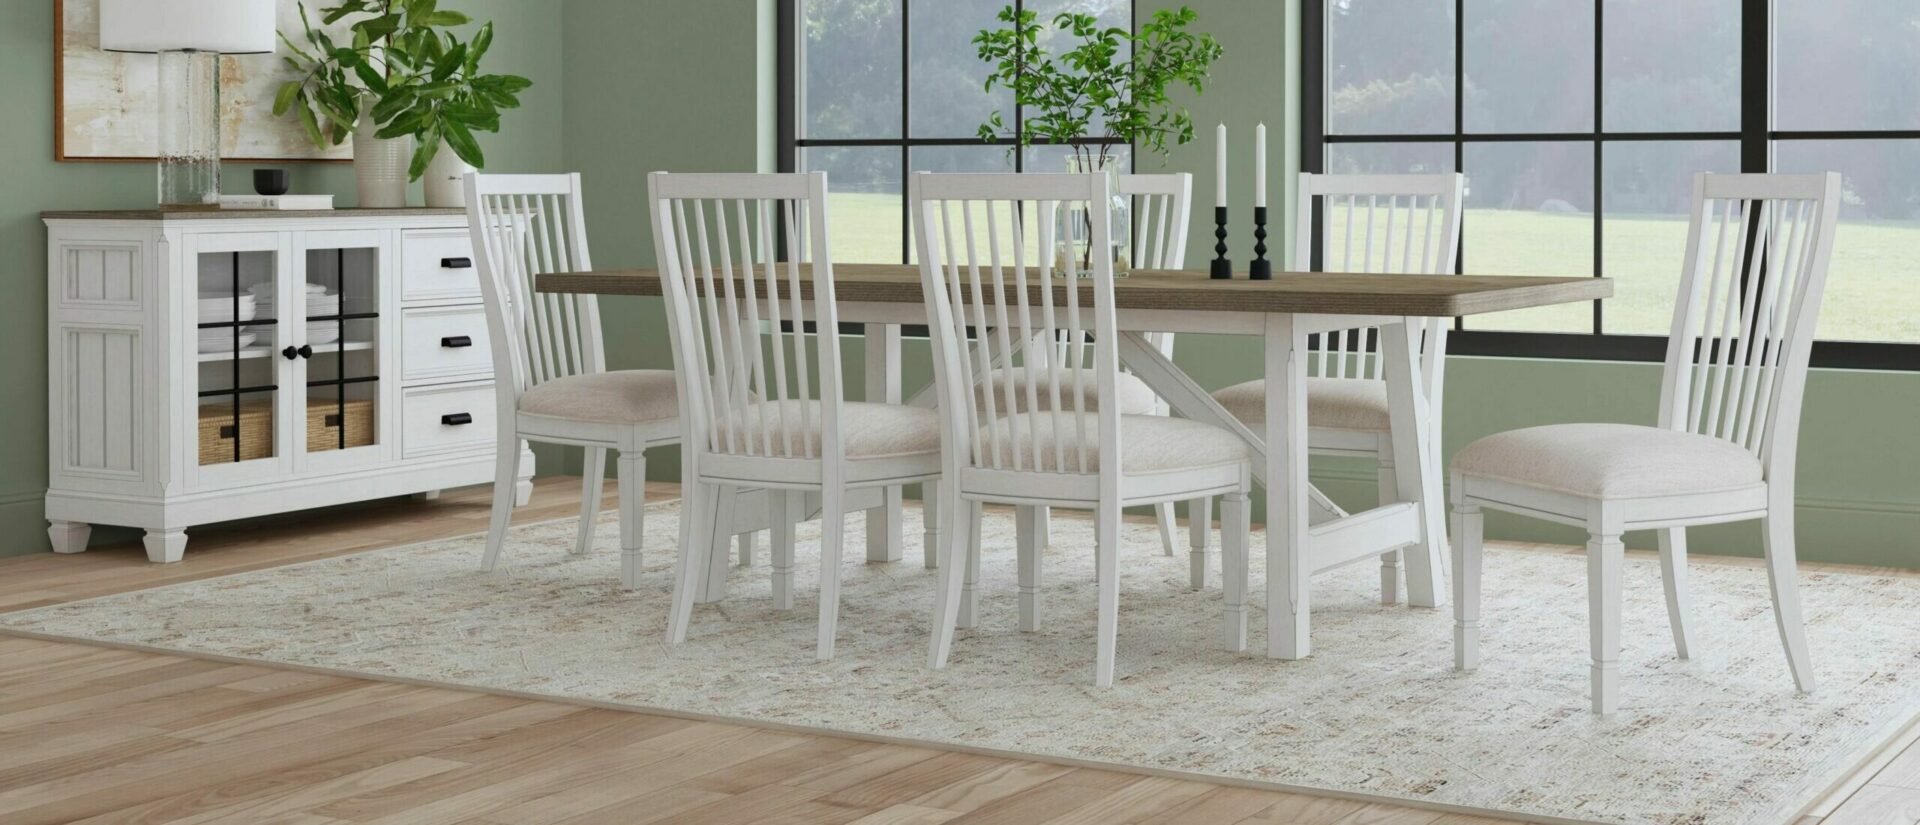 Product Dining Room